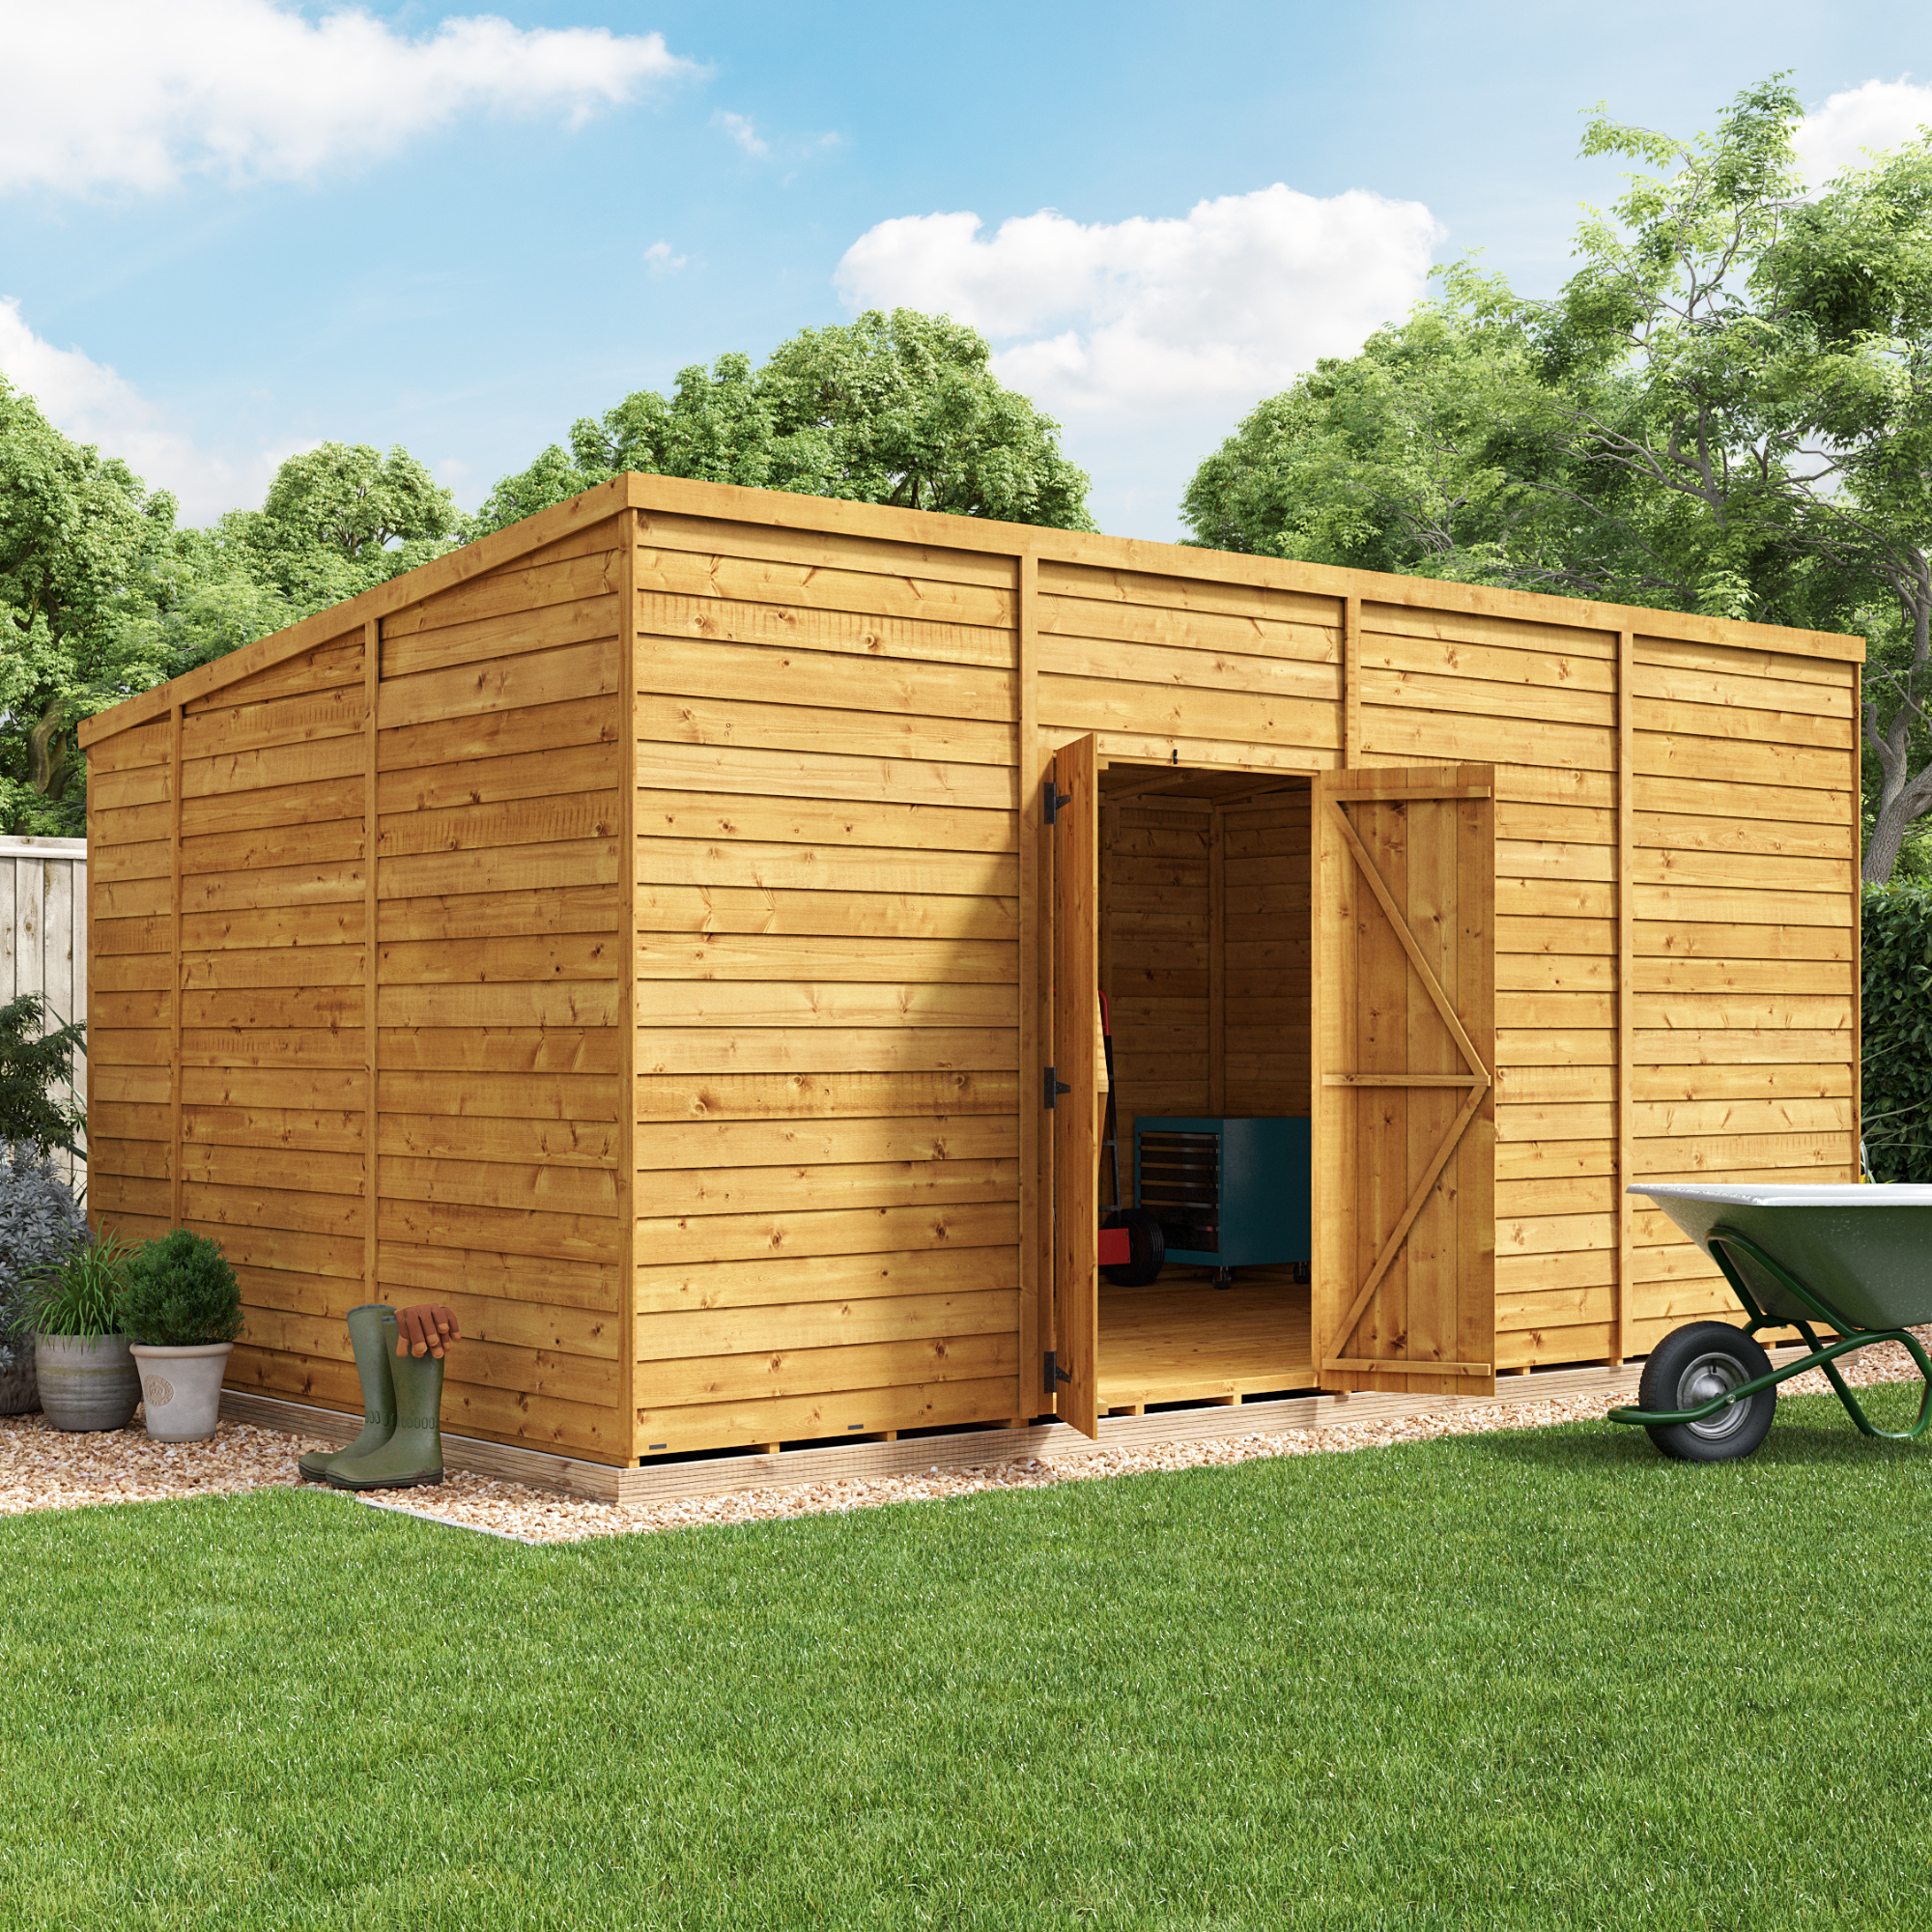 BillyOh Switch Overlap Pent Shed - 16x10 Windowless